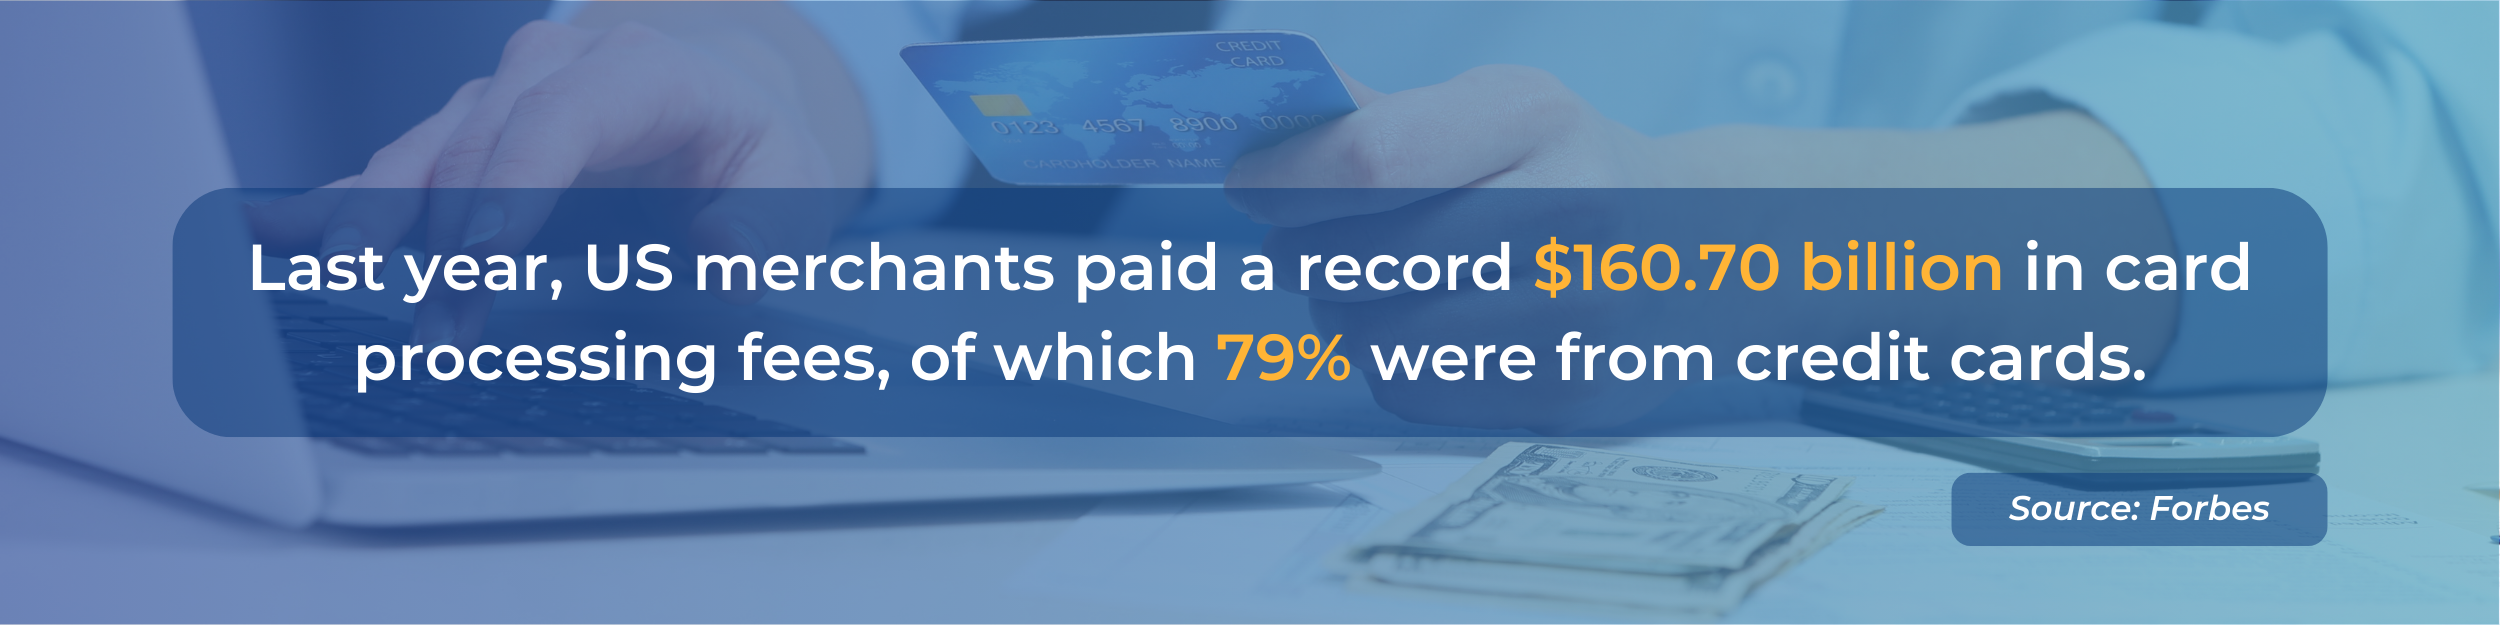 Statistics about credit card processing fees